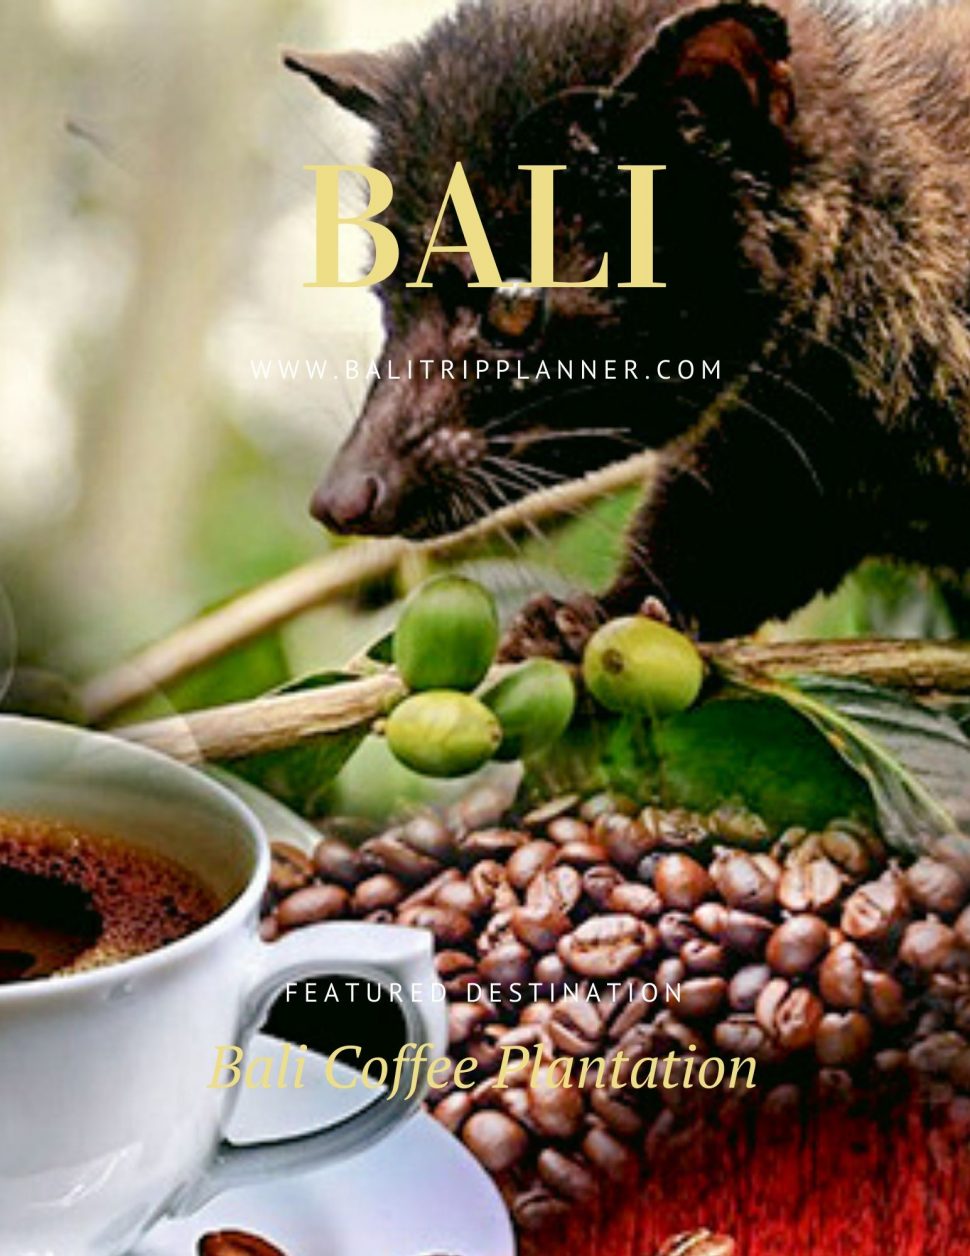 Attraction of Bali Coffee Plantation - Bali Tour Packages And Honeymoon